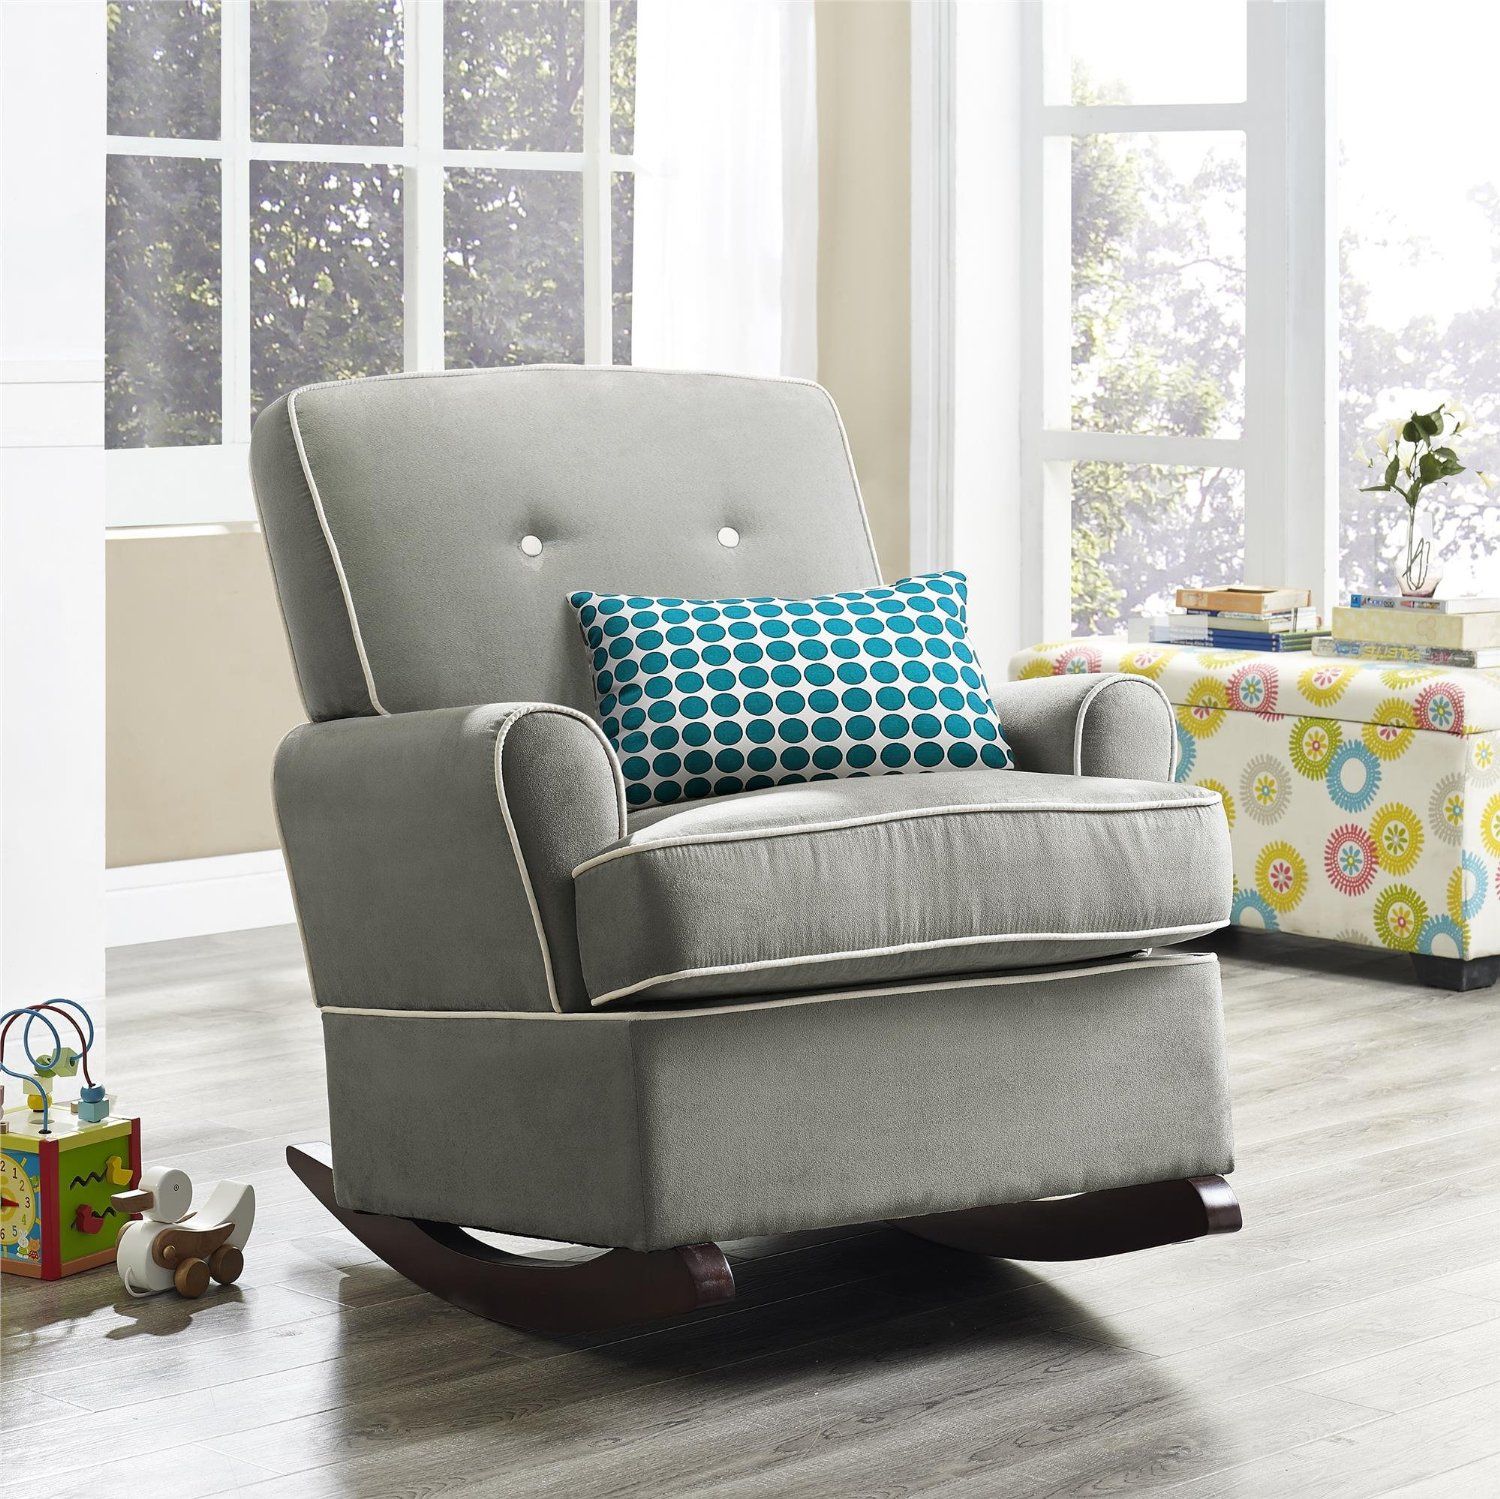 The Best Upholstered Rocking Chair 2018 | Best Rocking Chairs Intended For Padded Rocking Chairs (Photo 9 of 20)